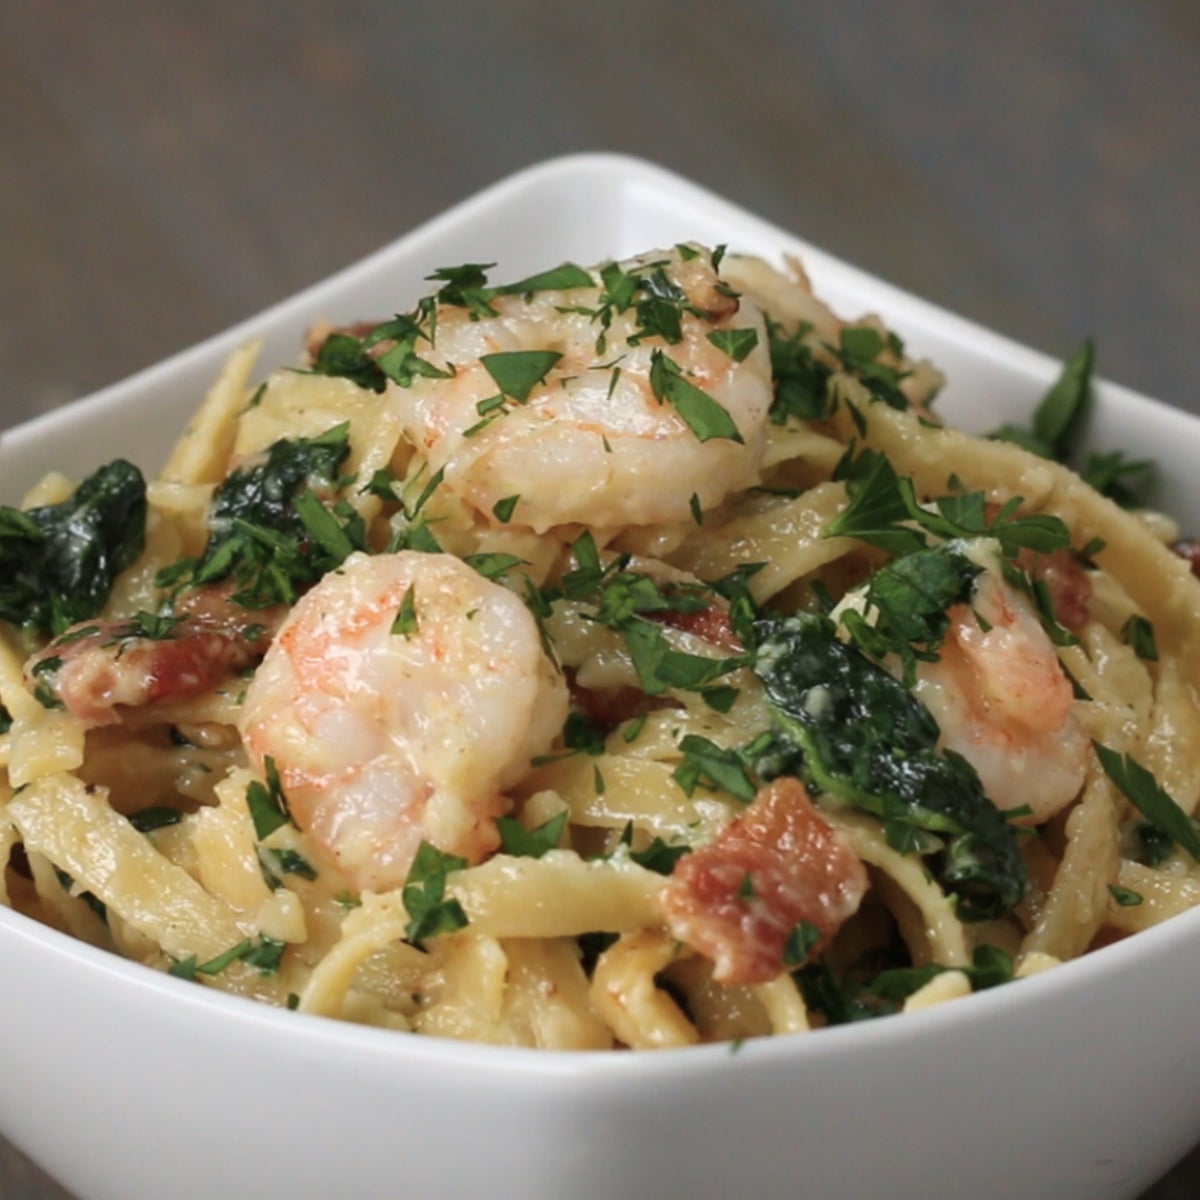 One-Pot Shrimp And Spinach Fettuccine Alfredo Pasta Recipe by Tasty